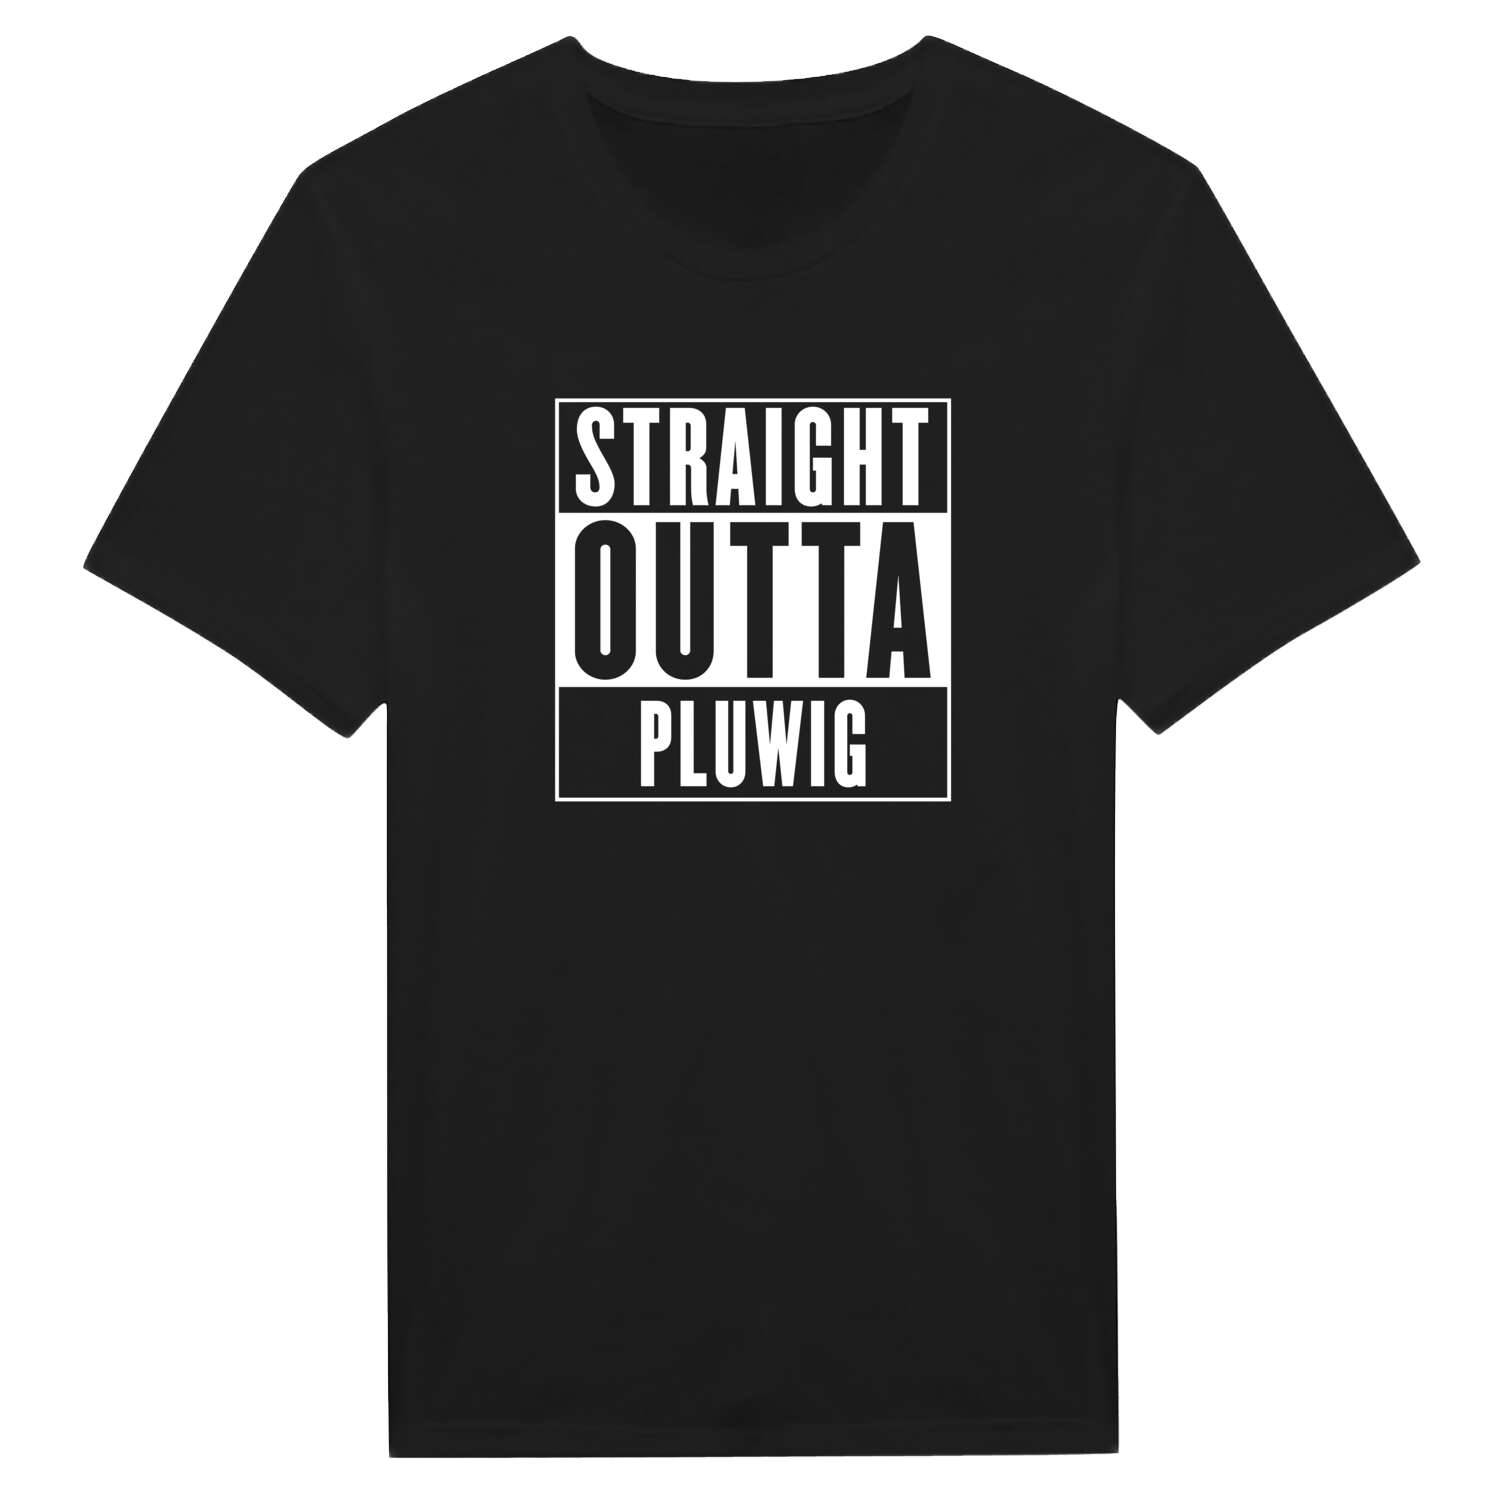 Pluwig T-Shirt »Straight Outta«